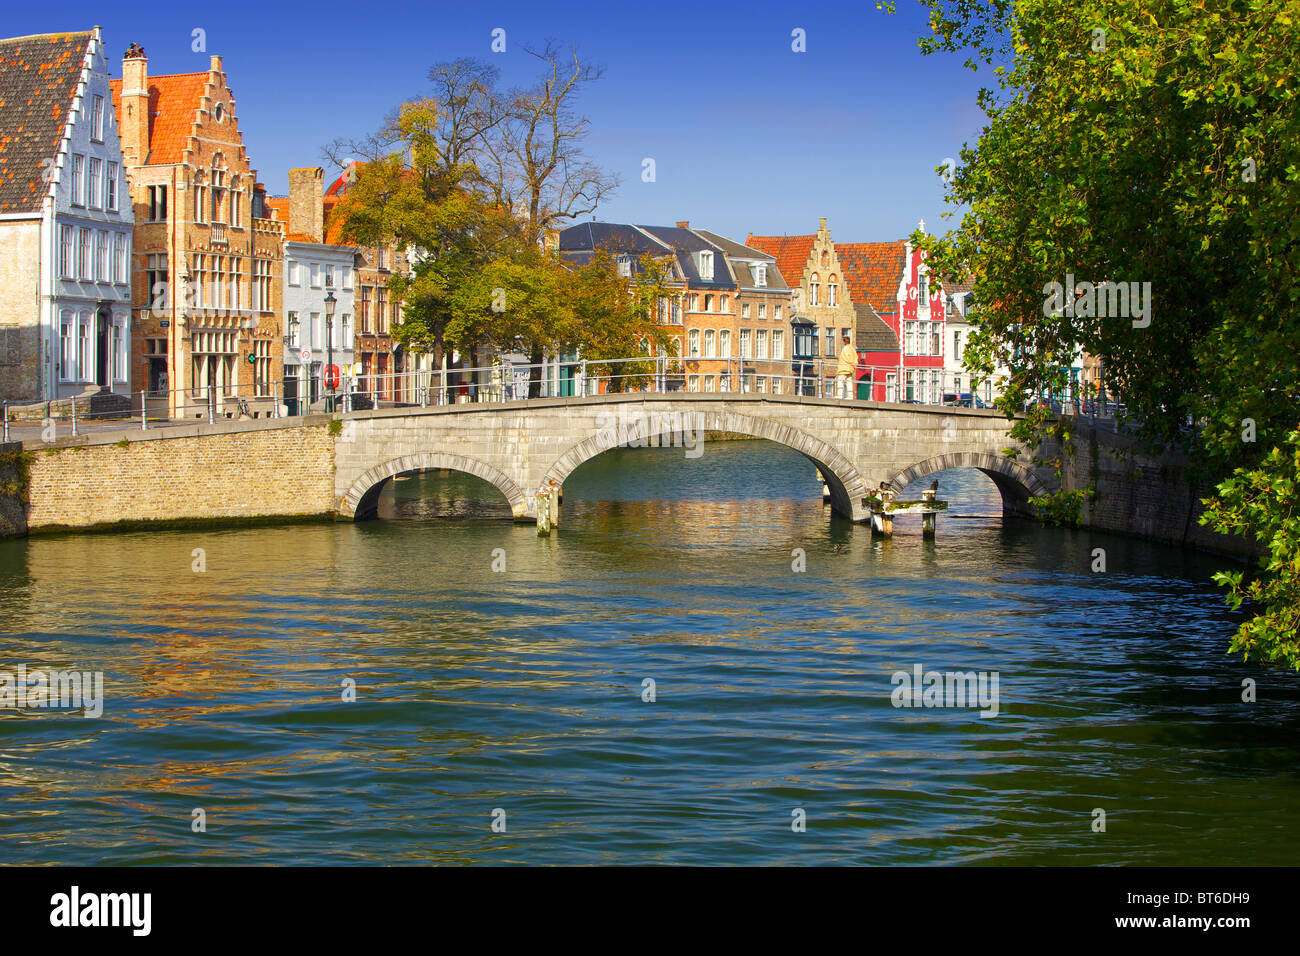 The bridge over the canal at Carmerstraat Stock Photo